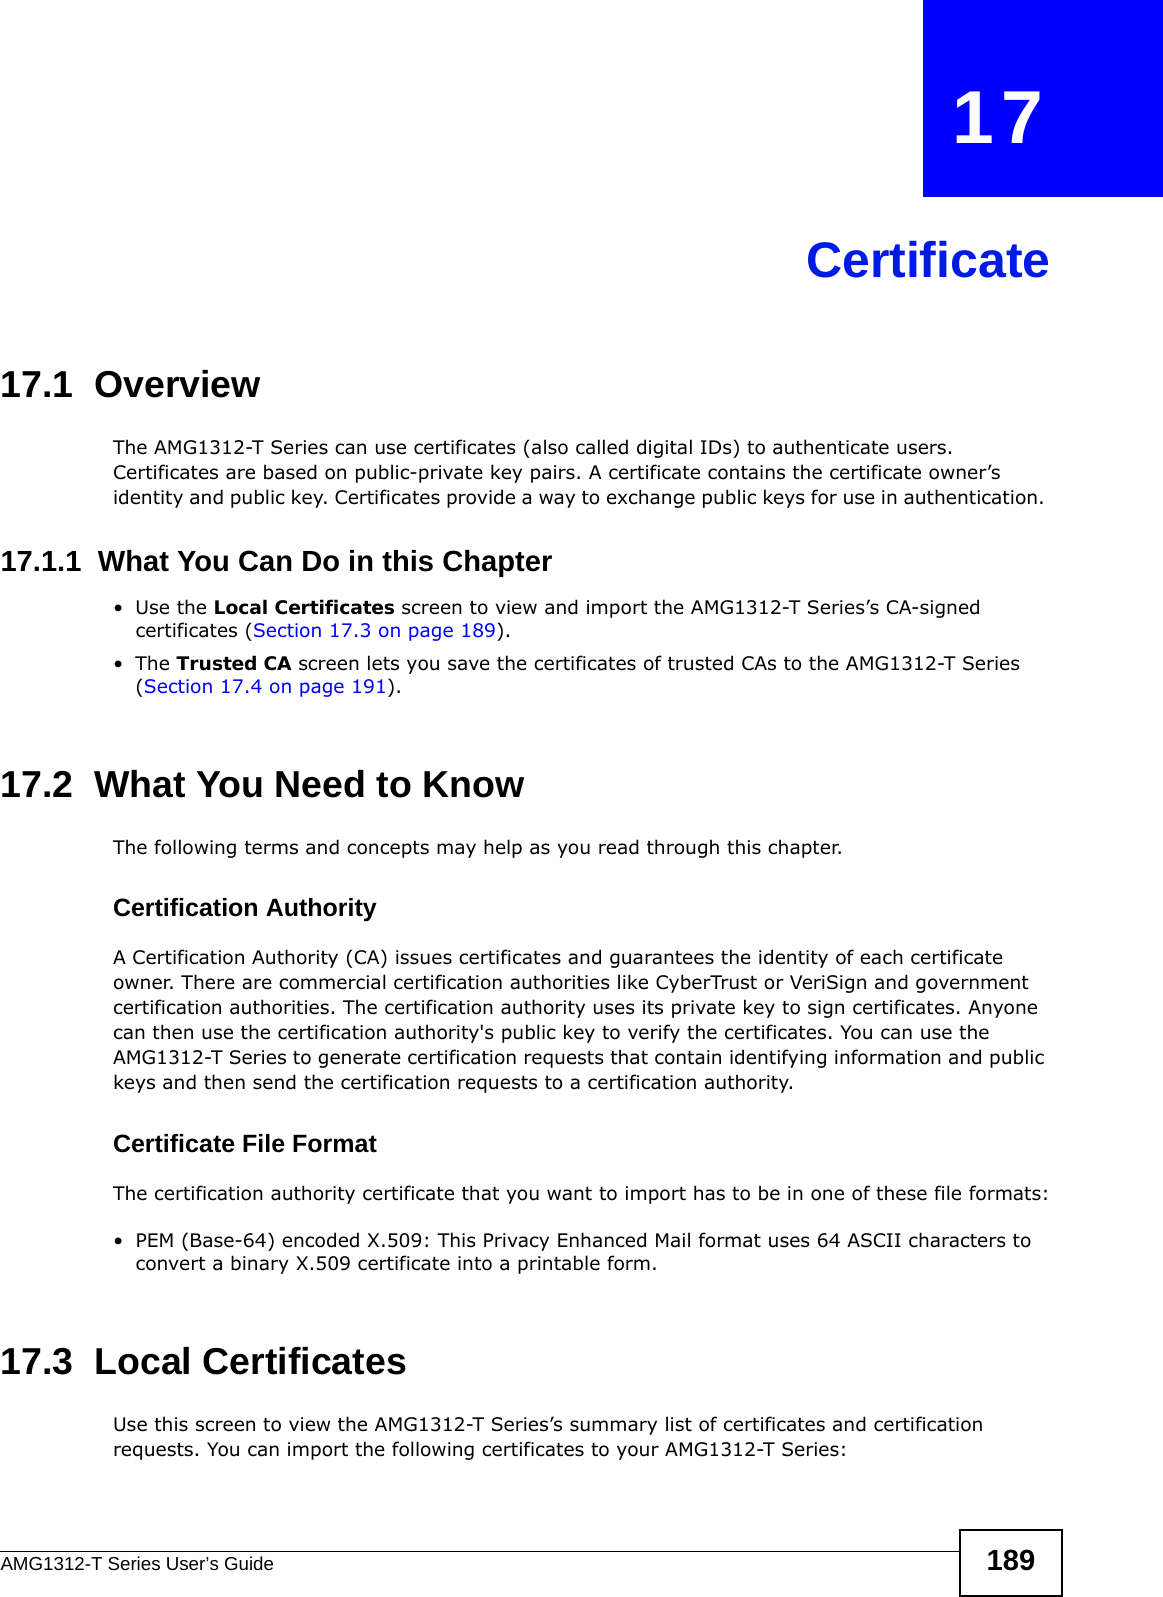 AMG1312-T Series User’s Guide 189CHAPTER   17Certificate17.1  OverviewThe AMG1312-T Series can use certificates (also called digital IDs) to authenticate users. Certificates are based on public-private key pairs. A certificate contains the certificate owner’s identity and public key. Certificates provide a way to exchange public keys for use in authentication. 17.1.1  What You Can Do in this Chapter•Use the Local Certificates screen to view and import the AMG1312-T Series’s CA-signed certificates (Section 17.3 on page 189).•The Trusted CA screen lets you save the certificates of trusted CAs to the AMG1312-T Series (Section 17.4 on page 191).17.2  What You Need to KnowThe following terms and concepts may help as you read through this chapter.Certification Authority A Certification Authority (CA) issues certificates and guarantees the identity of each certificate owner. There are commercial certification authorities like CyberTrust or VeriSign and government certification authorities. The certification authority uses its private key to sign certificates. Anyone can then use the certification authority&apos;s public key to verify the certificates. You can use the AMG1312-T Series to generate certification requests that contain identifying information and public keys and then send the certification requests to a certification authority.Certificate File FormatThe certification authority certificate that you want to import has to be in one of these file formats:• PEM (Base-64) encoded X.509: This Privacy Enhanced Mail format uses 64 ASCII characters to convert a binary X.509 certificate into a printable form.17.3  Local CertificatesUse this screen to view the AMG1312-T Series’s summary list of certificates and certification requests. You can import the following certificates to your AMG1312-T Series: